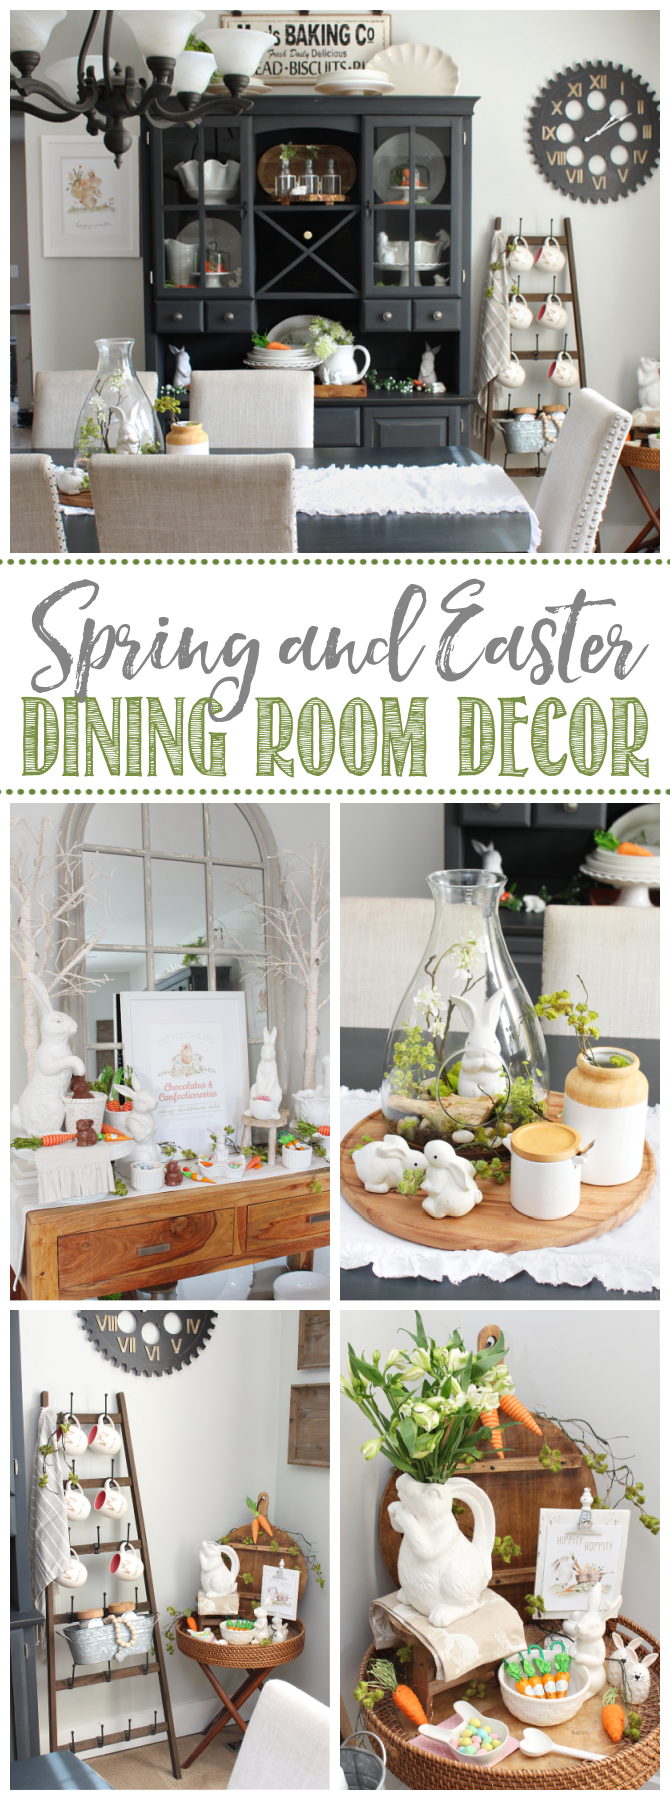 Collage of spring and Easter decor ideas in a dining room.